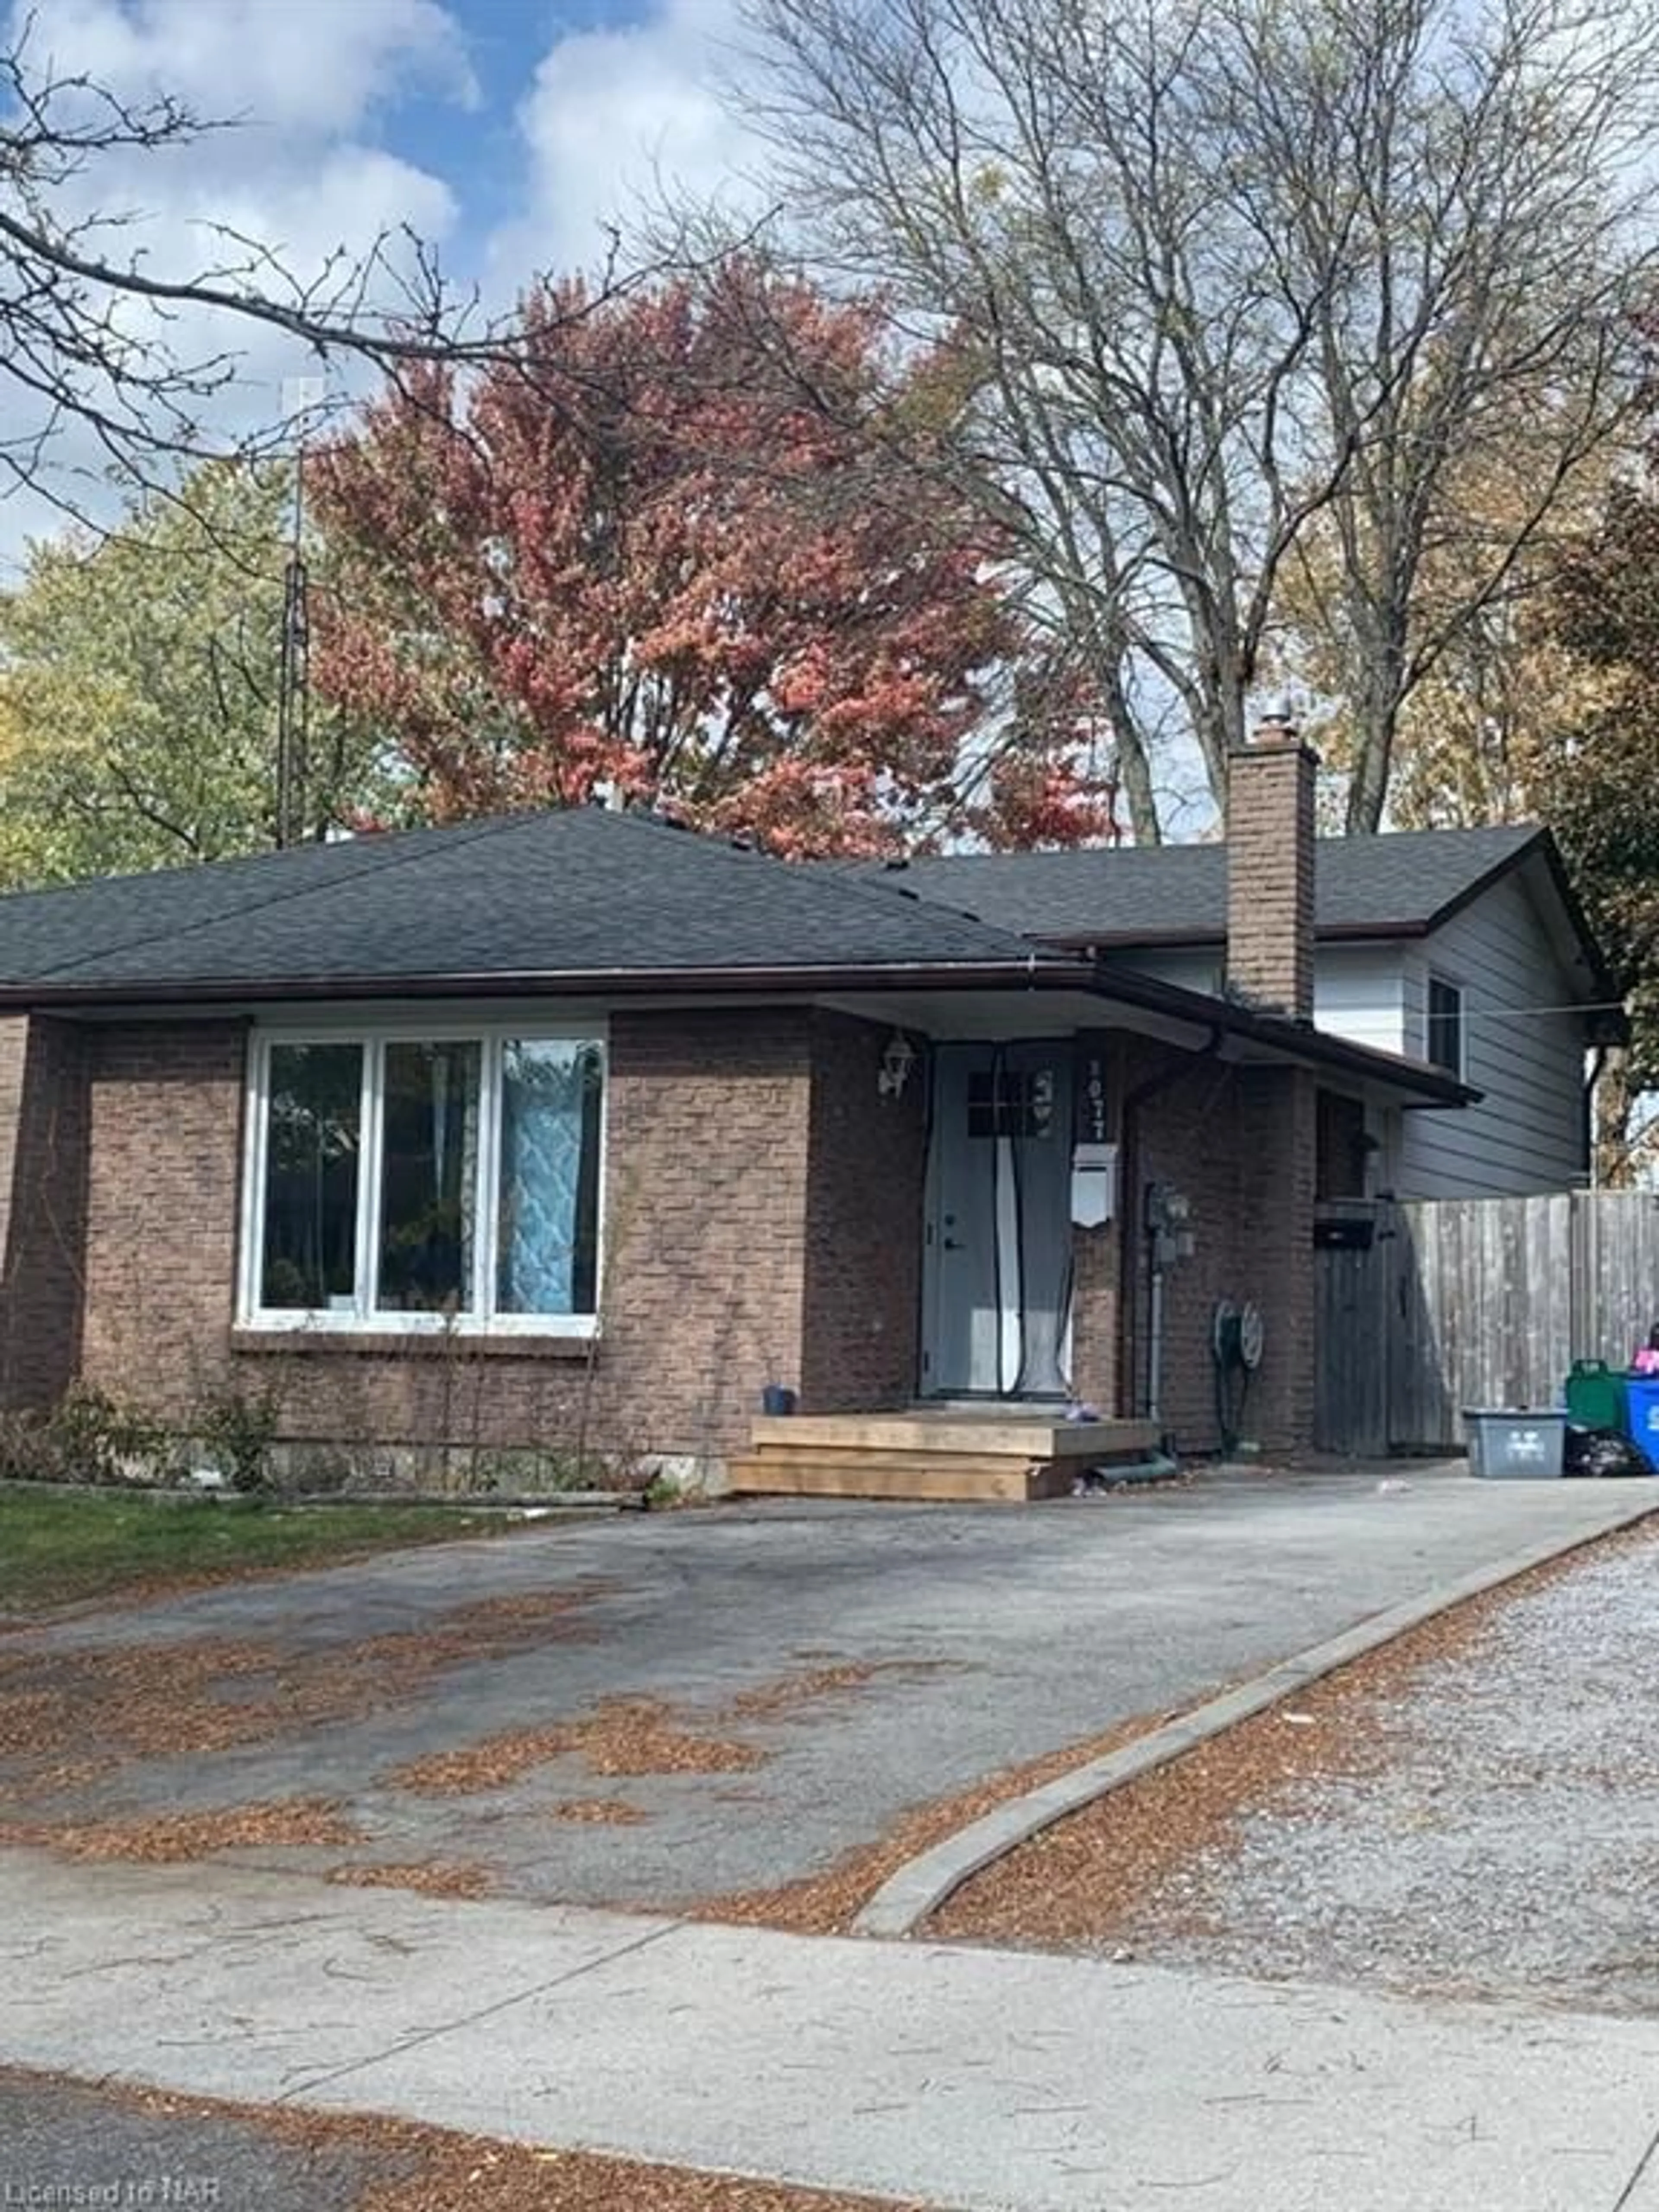 Home with unknown exterior material for 8077 Aintree Dr, Niagara Falls Ontario L2V 1H3